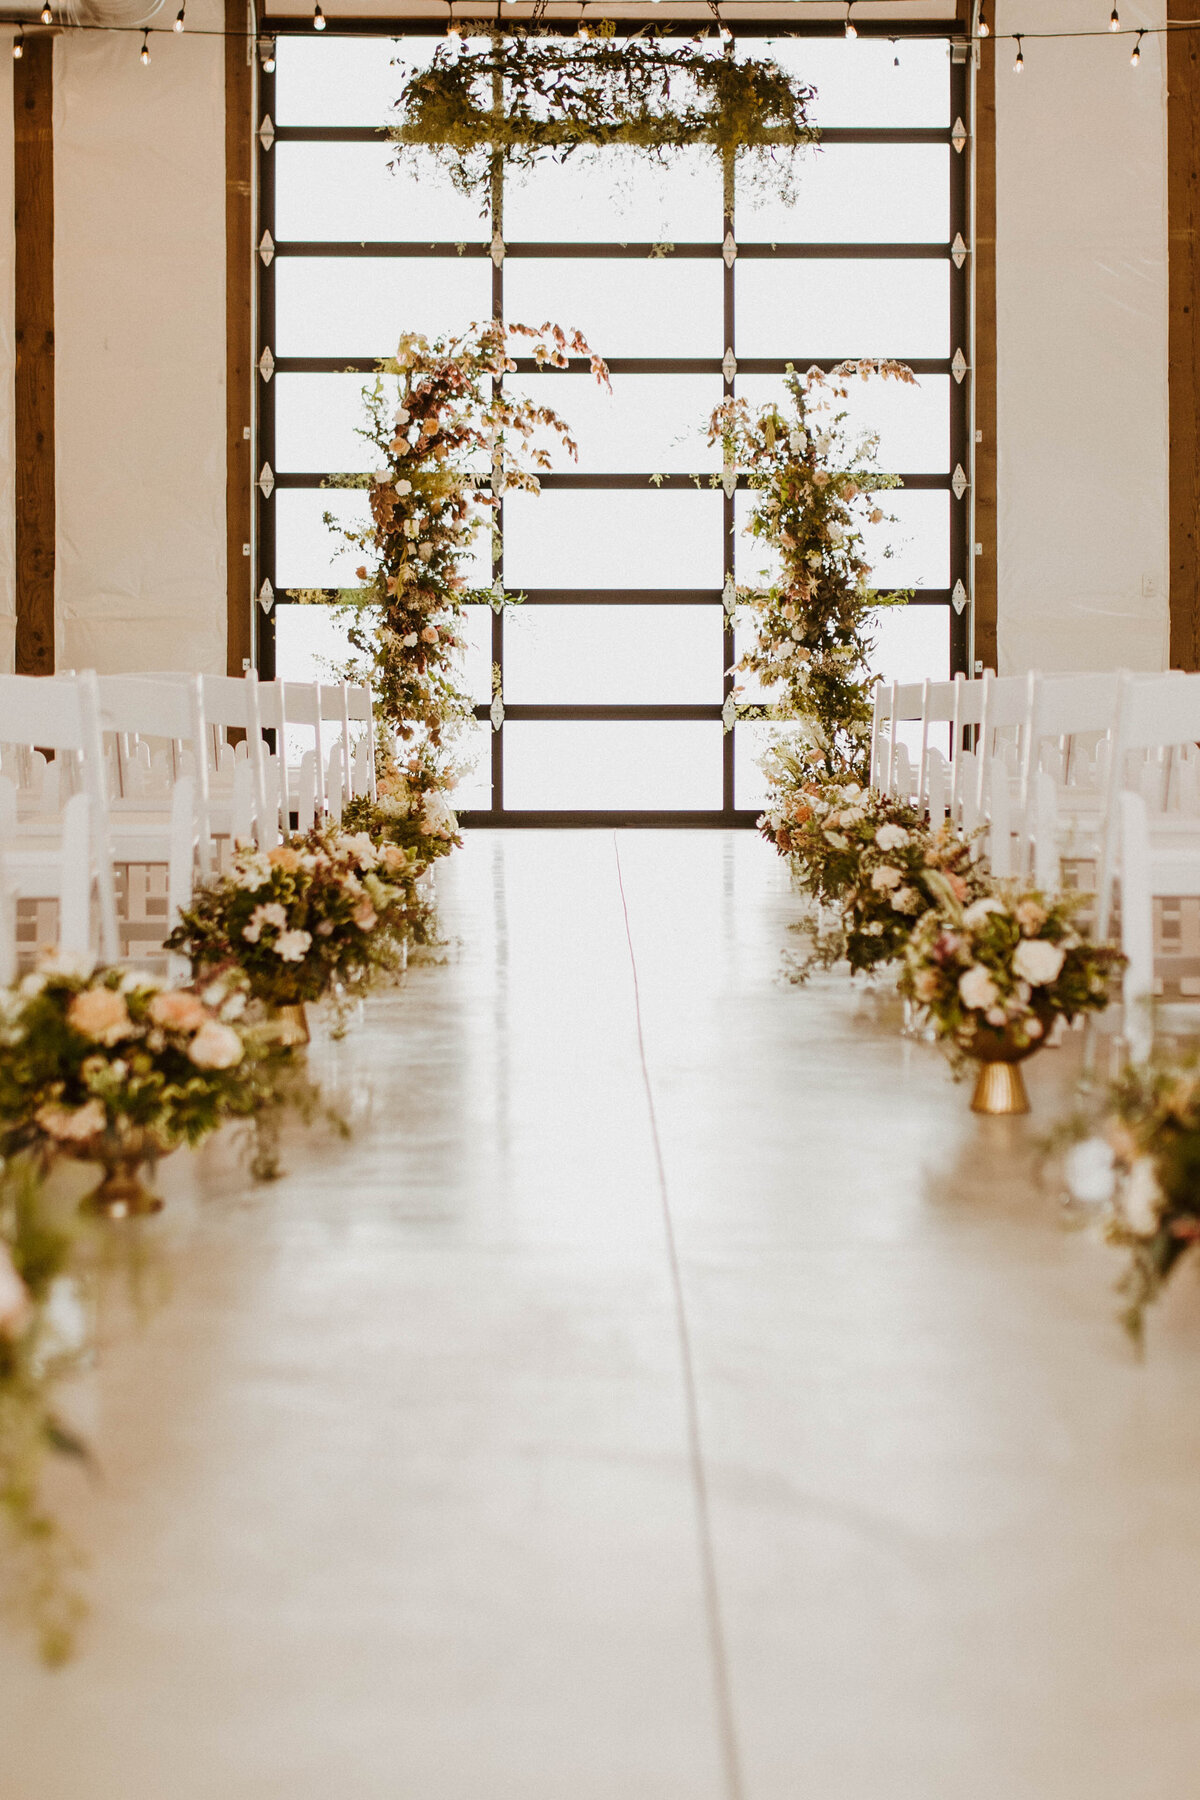 Shot of interior White Barn with rows of white chairs, flower placements at each row and a shot of the altar,  the big glass door framed with greenery and flowers.